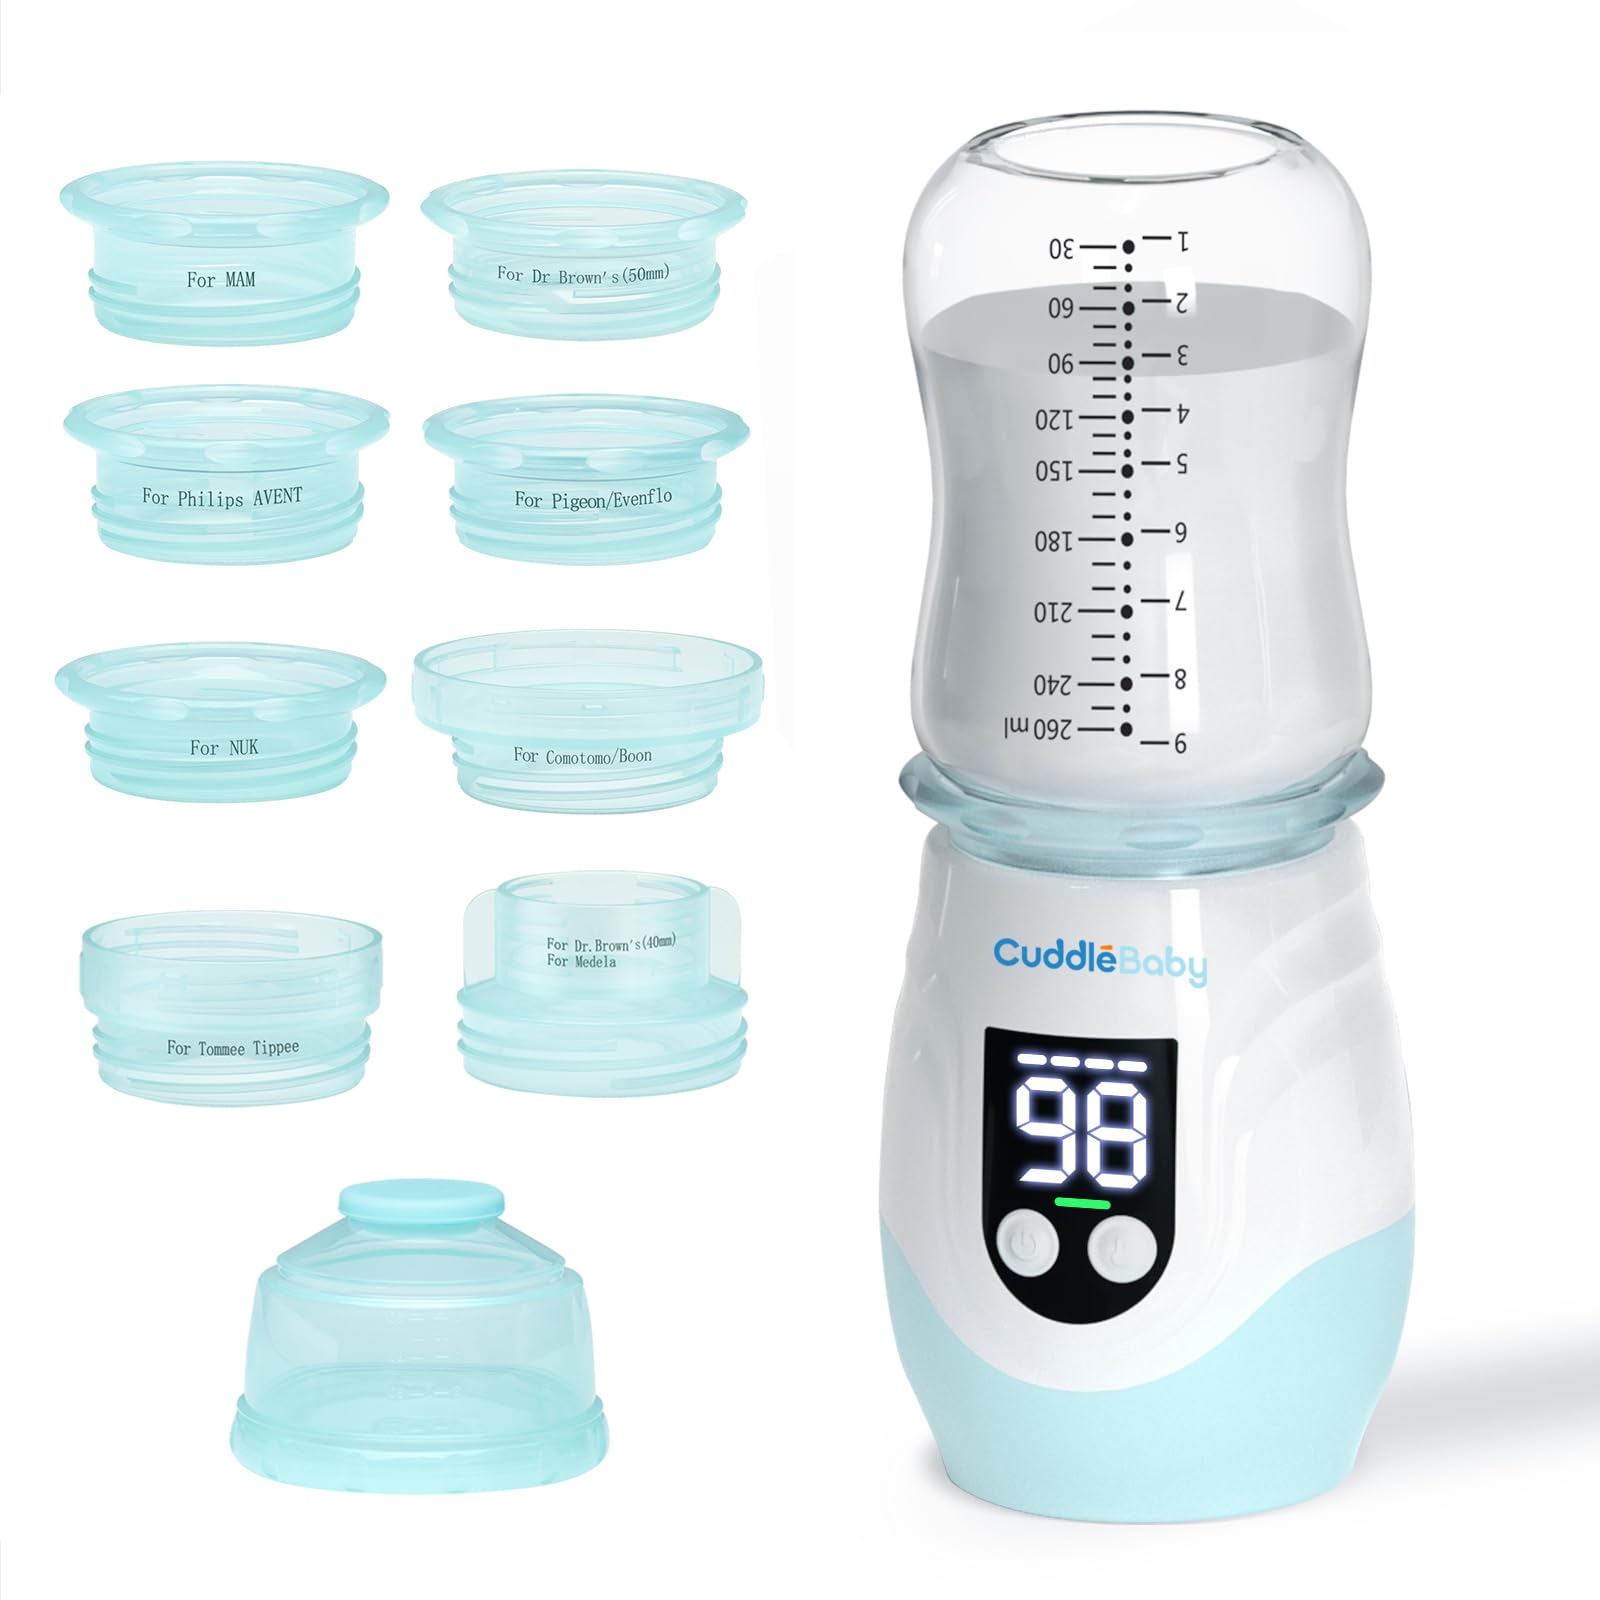 CuddleeBaby Portable Bottle Warmer for Travel, Cordless Baby Bottle Warmer, Rechargeable Bottle Warmer with 8 Adapters, 1 Milk Powder Container, Compatible with Most Bottle, Fast Heating, Blue